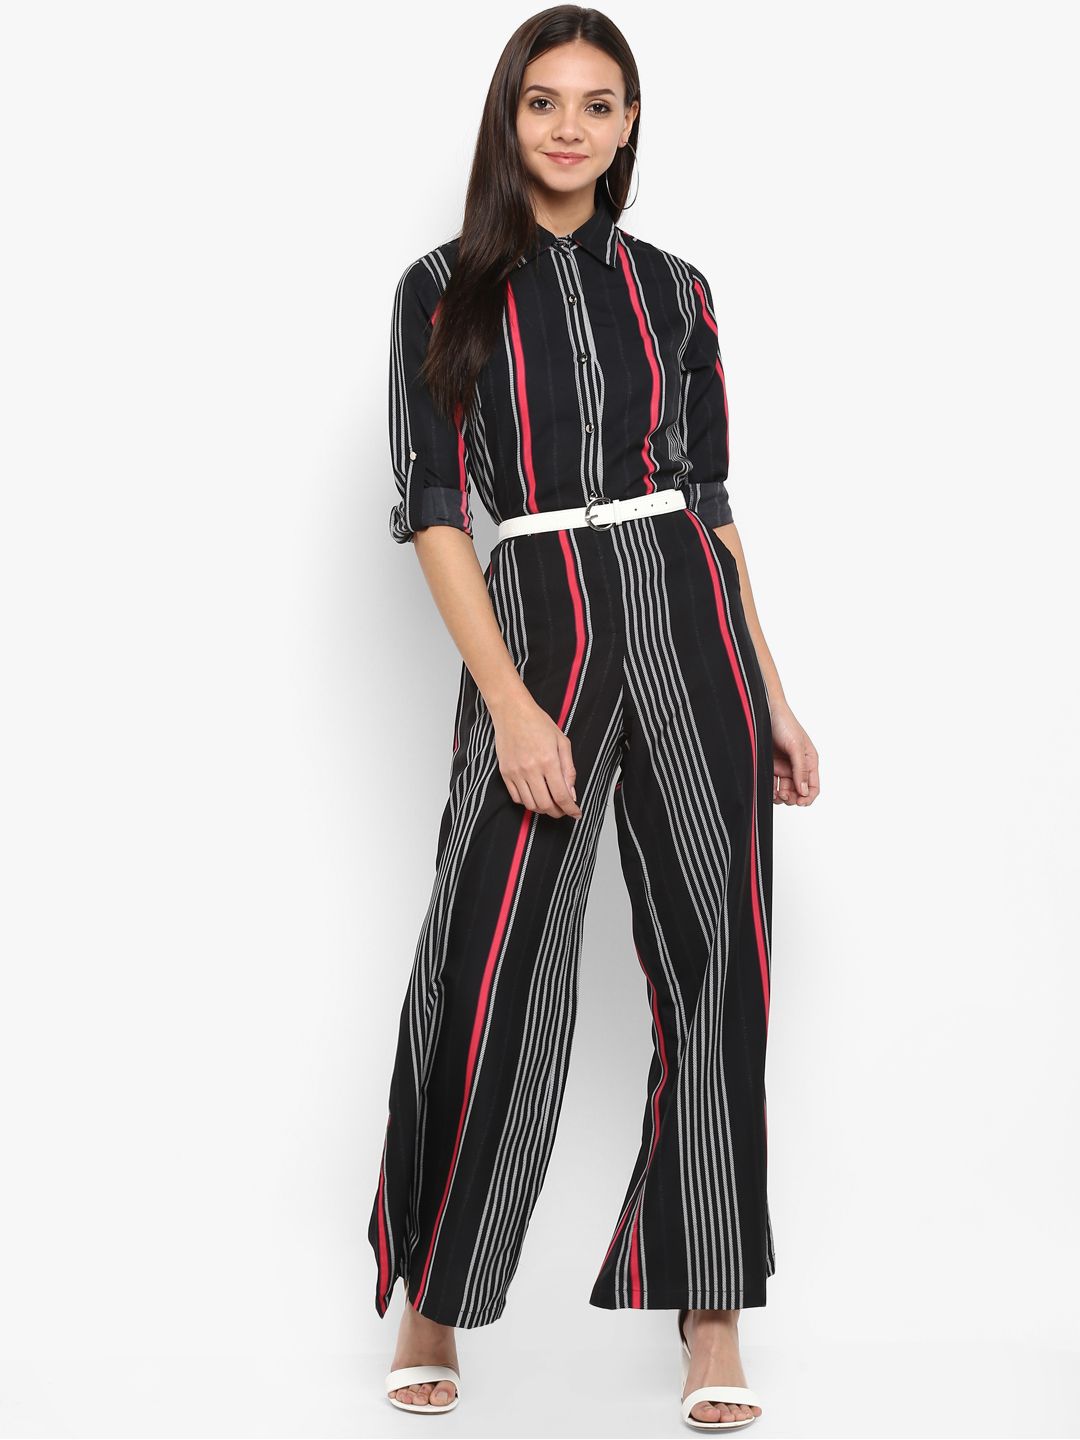 PURYS Black & White Striped Basic Jumpsuit Price in India